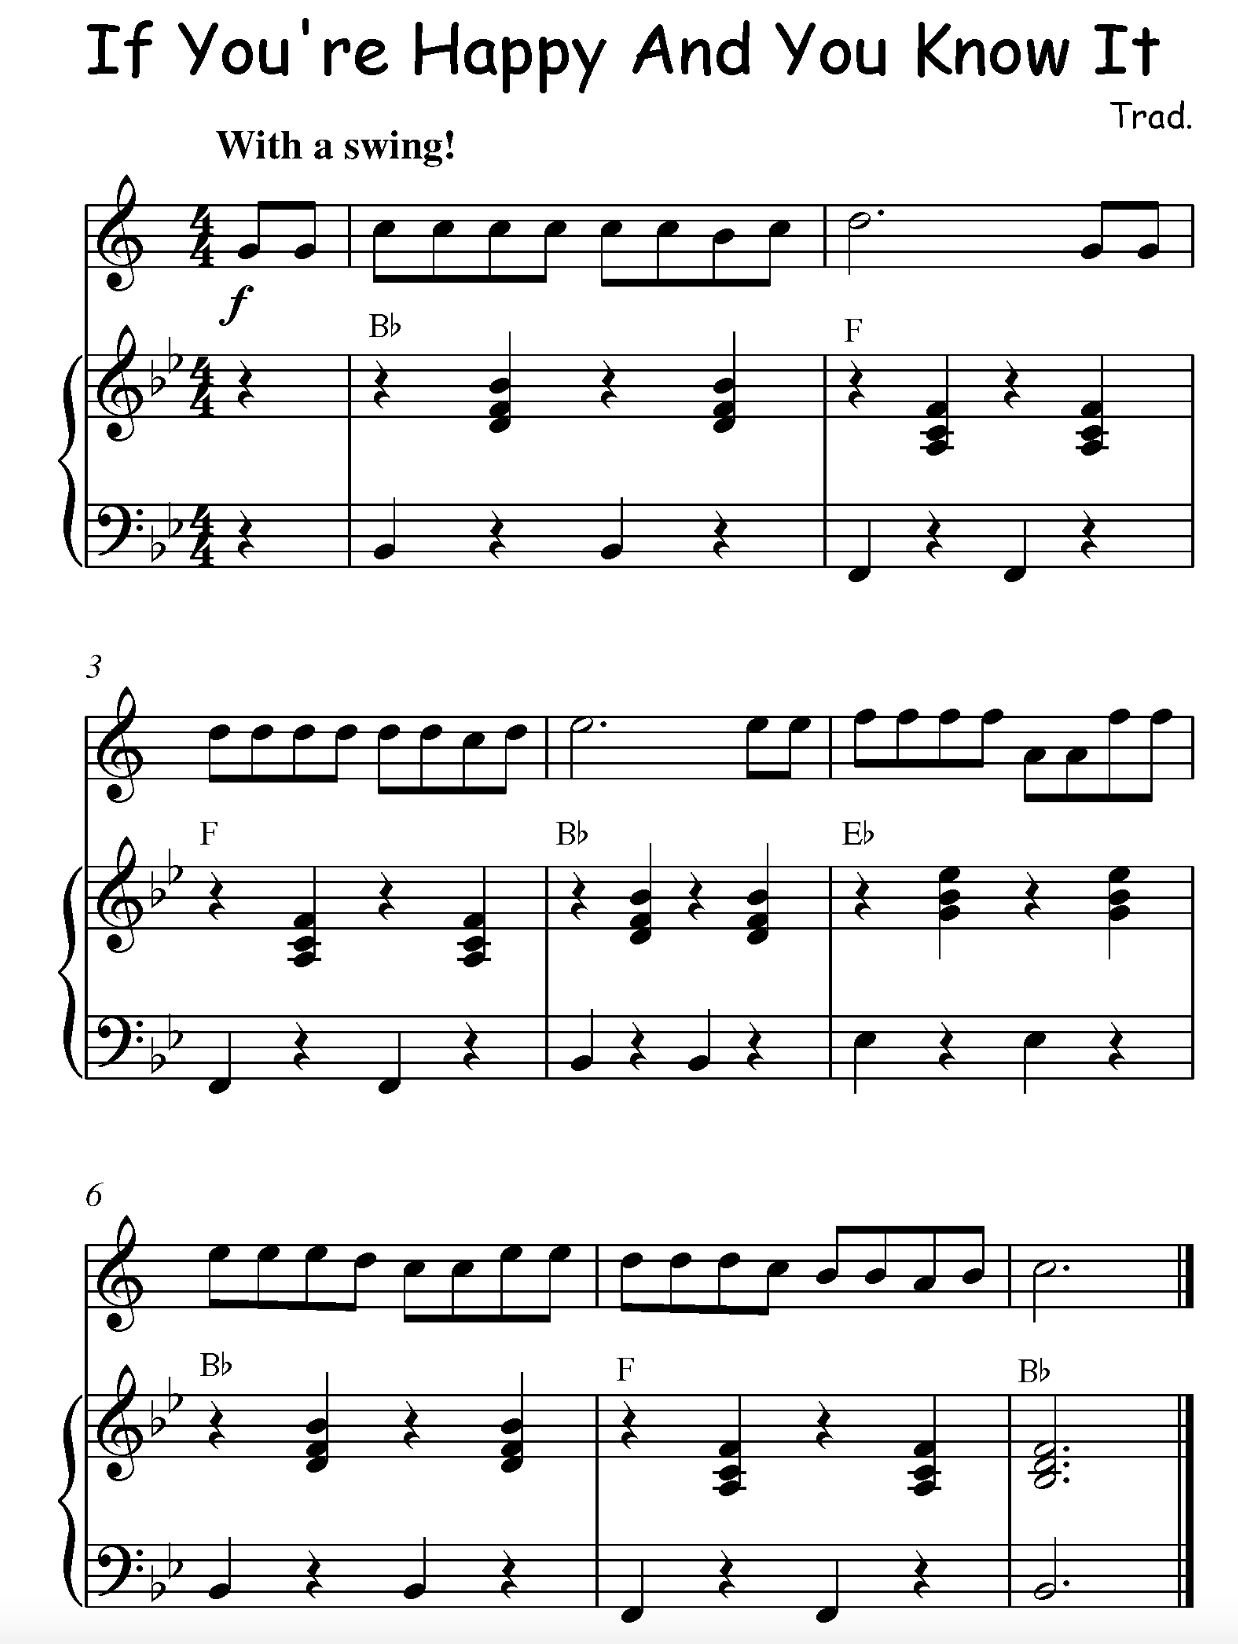 If You're Happy and You Know It clarinet sheet music